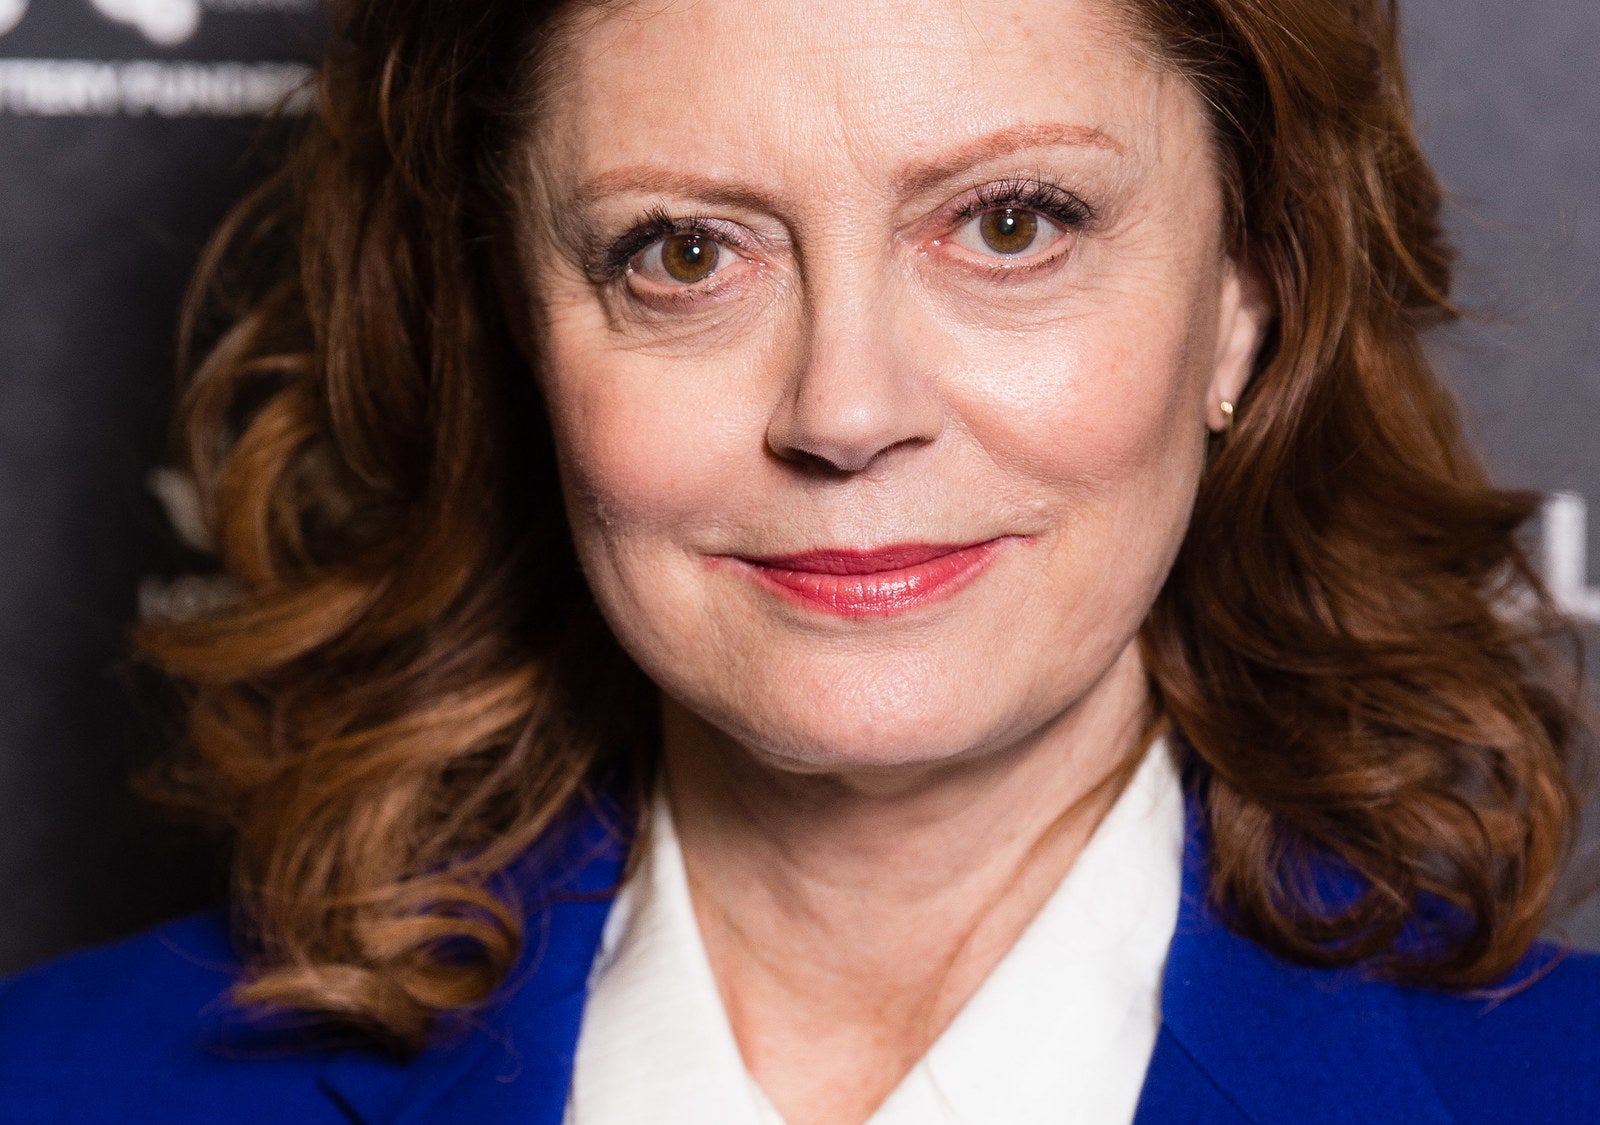 Susan Sarandon Is Demanding An In Depth Investigation Into Wwf Human Rights Allegations